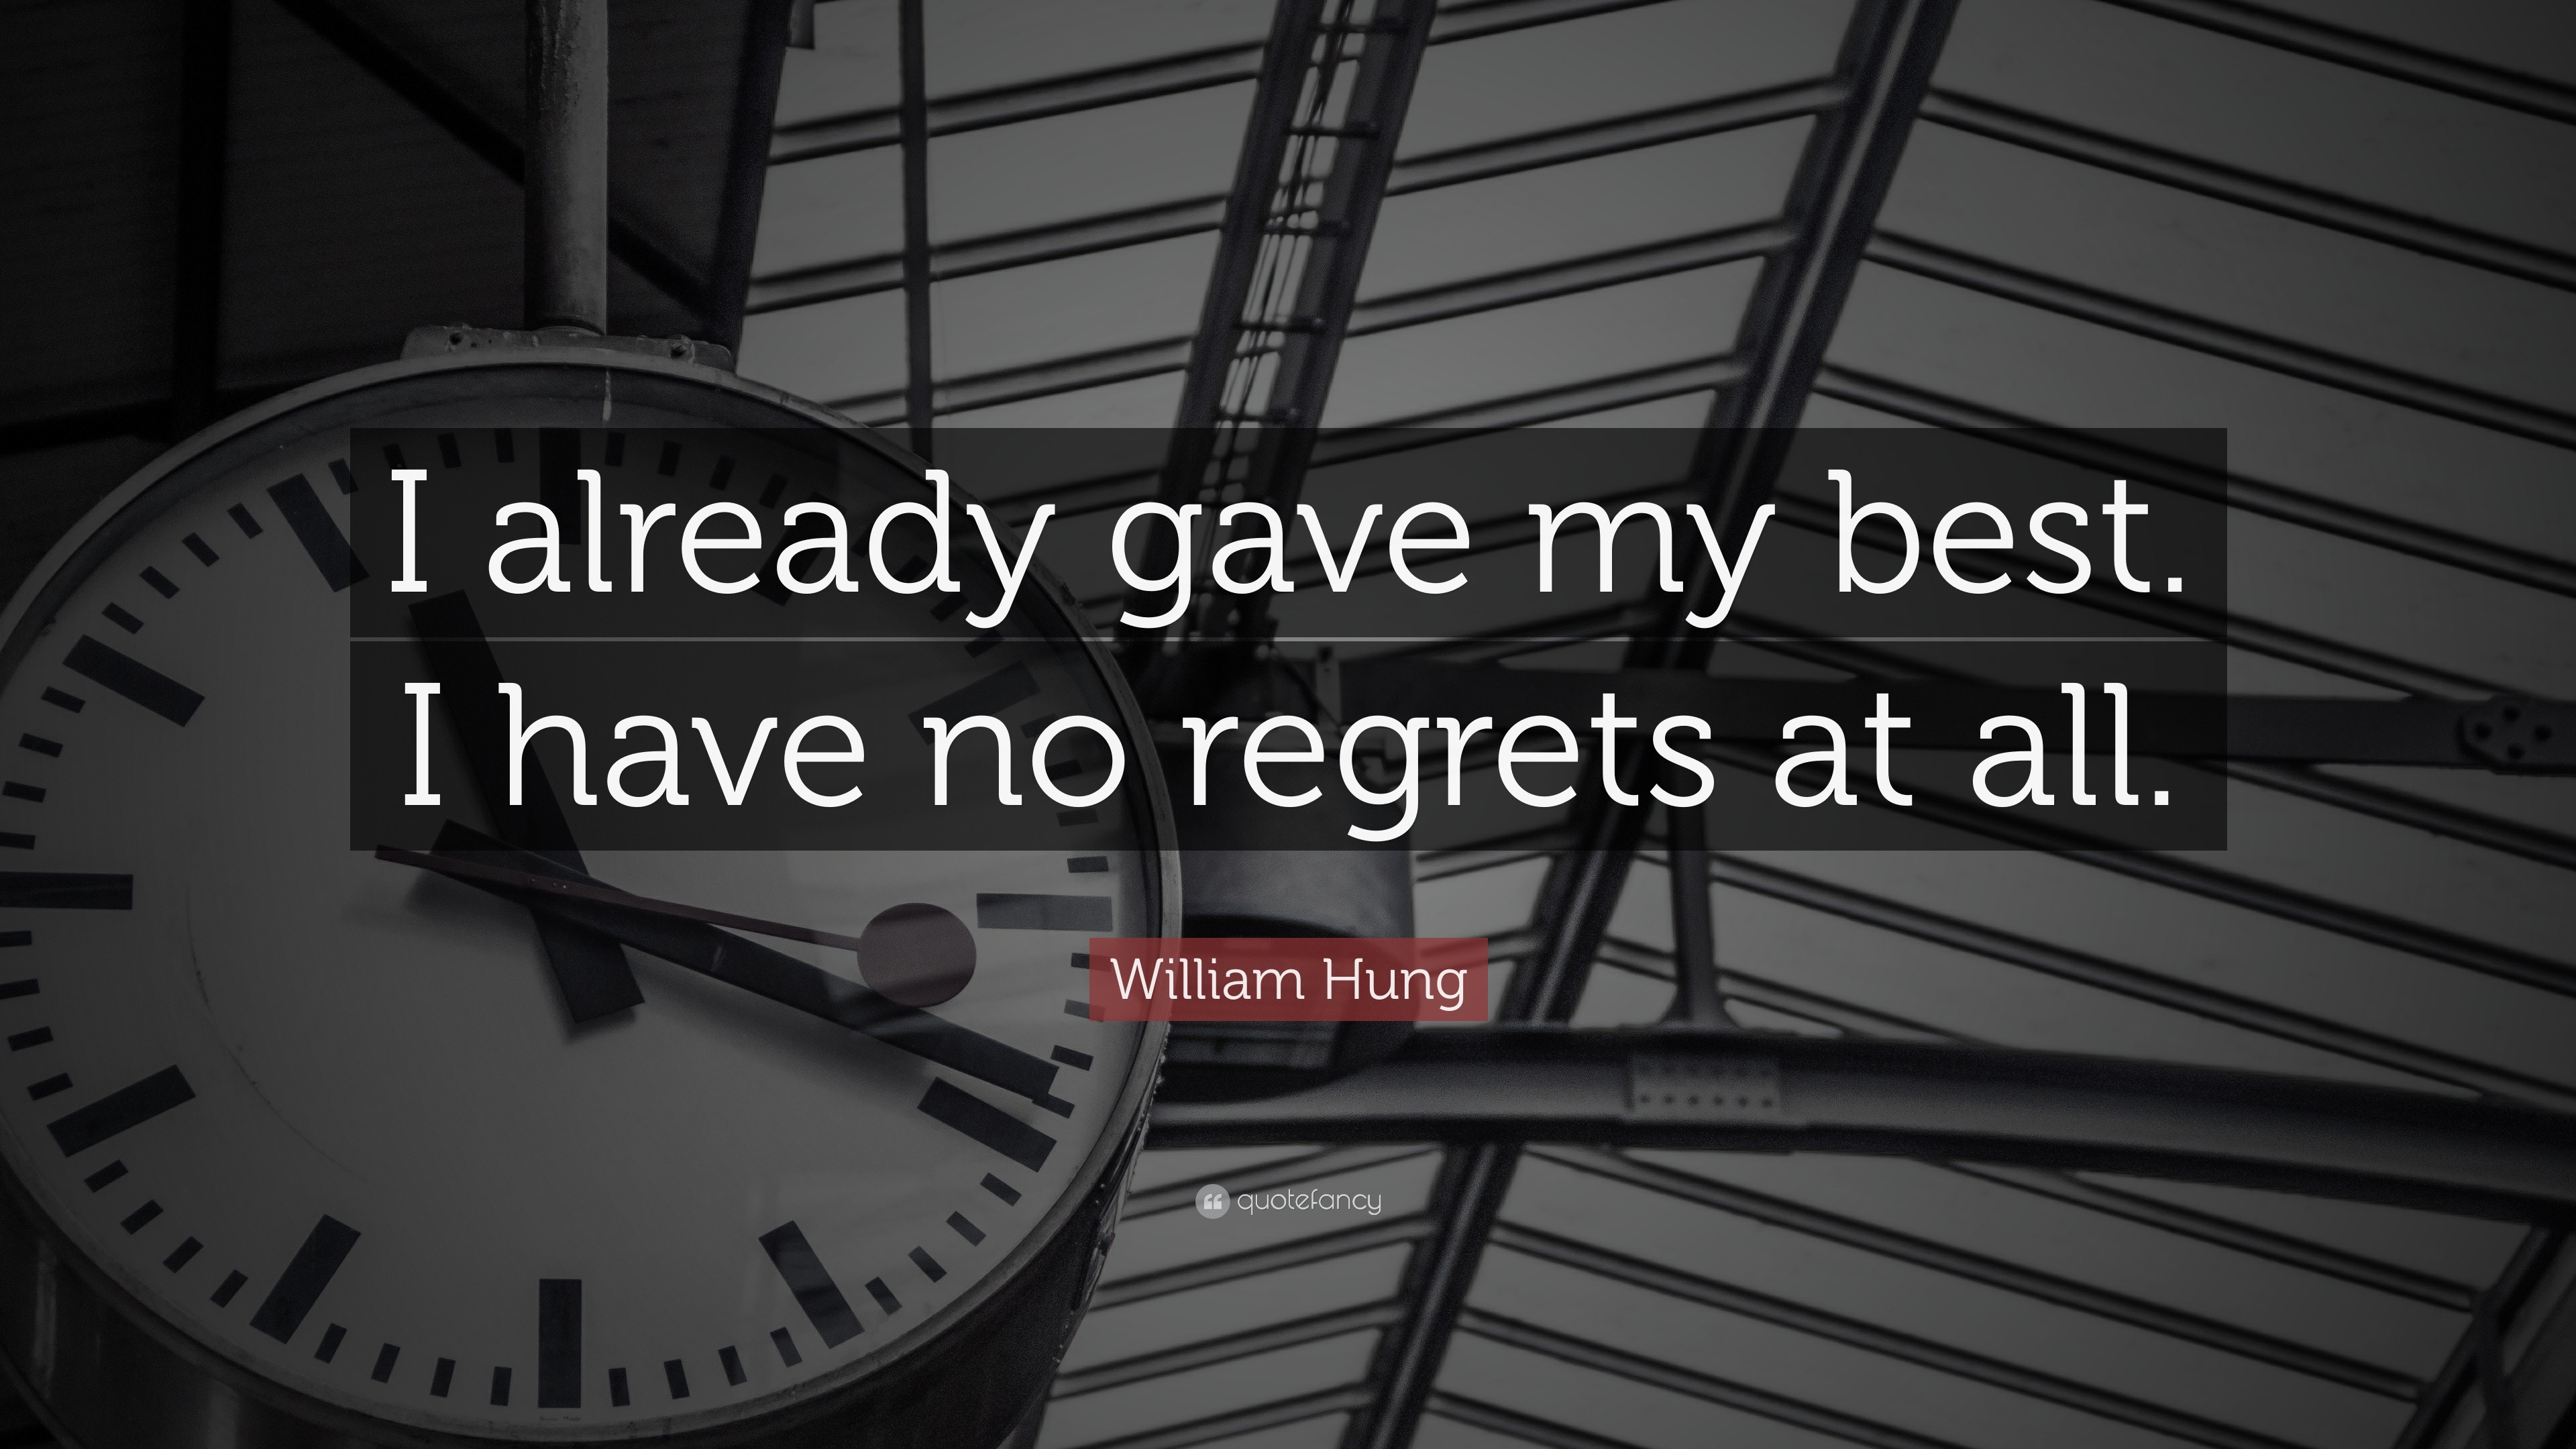 William Hung Quote: “I already gave my best. I have no regrets at all.”